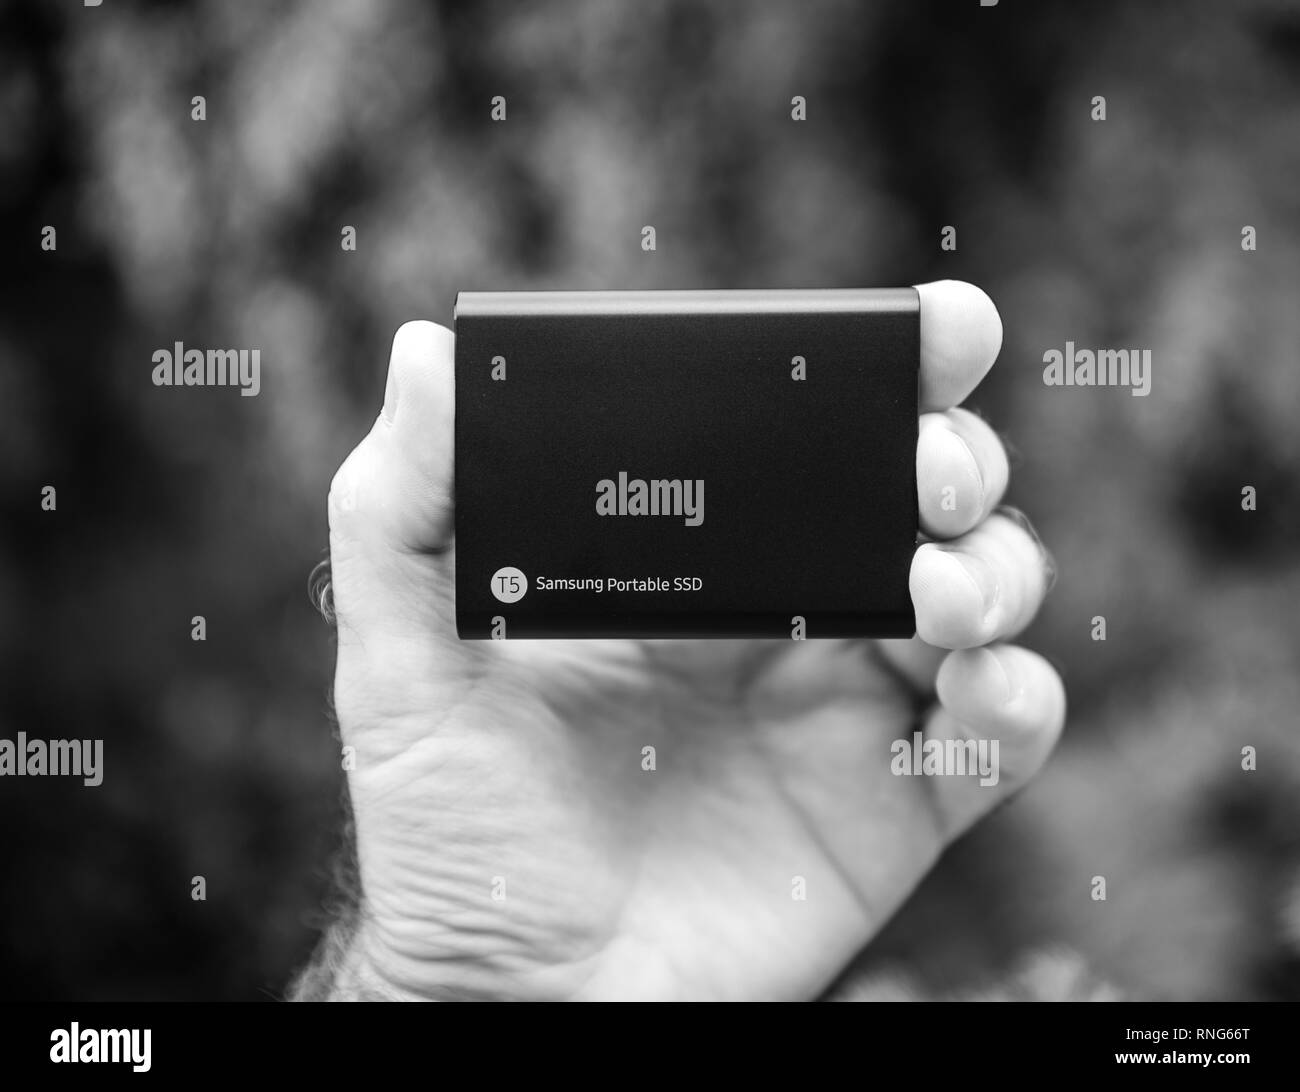 Ssd m Black and White Stock Photos & Images - Alamy